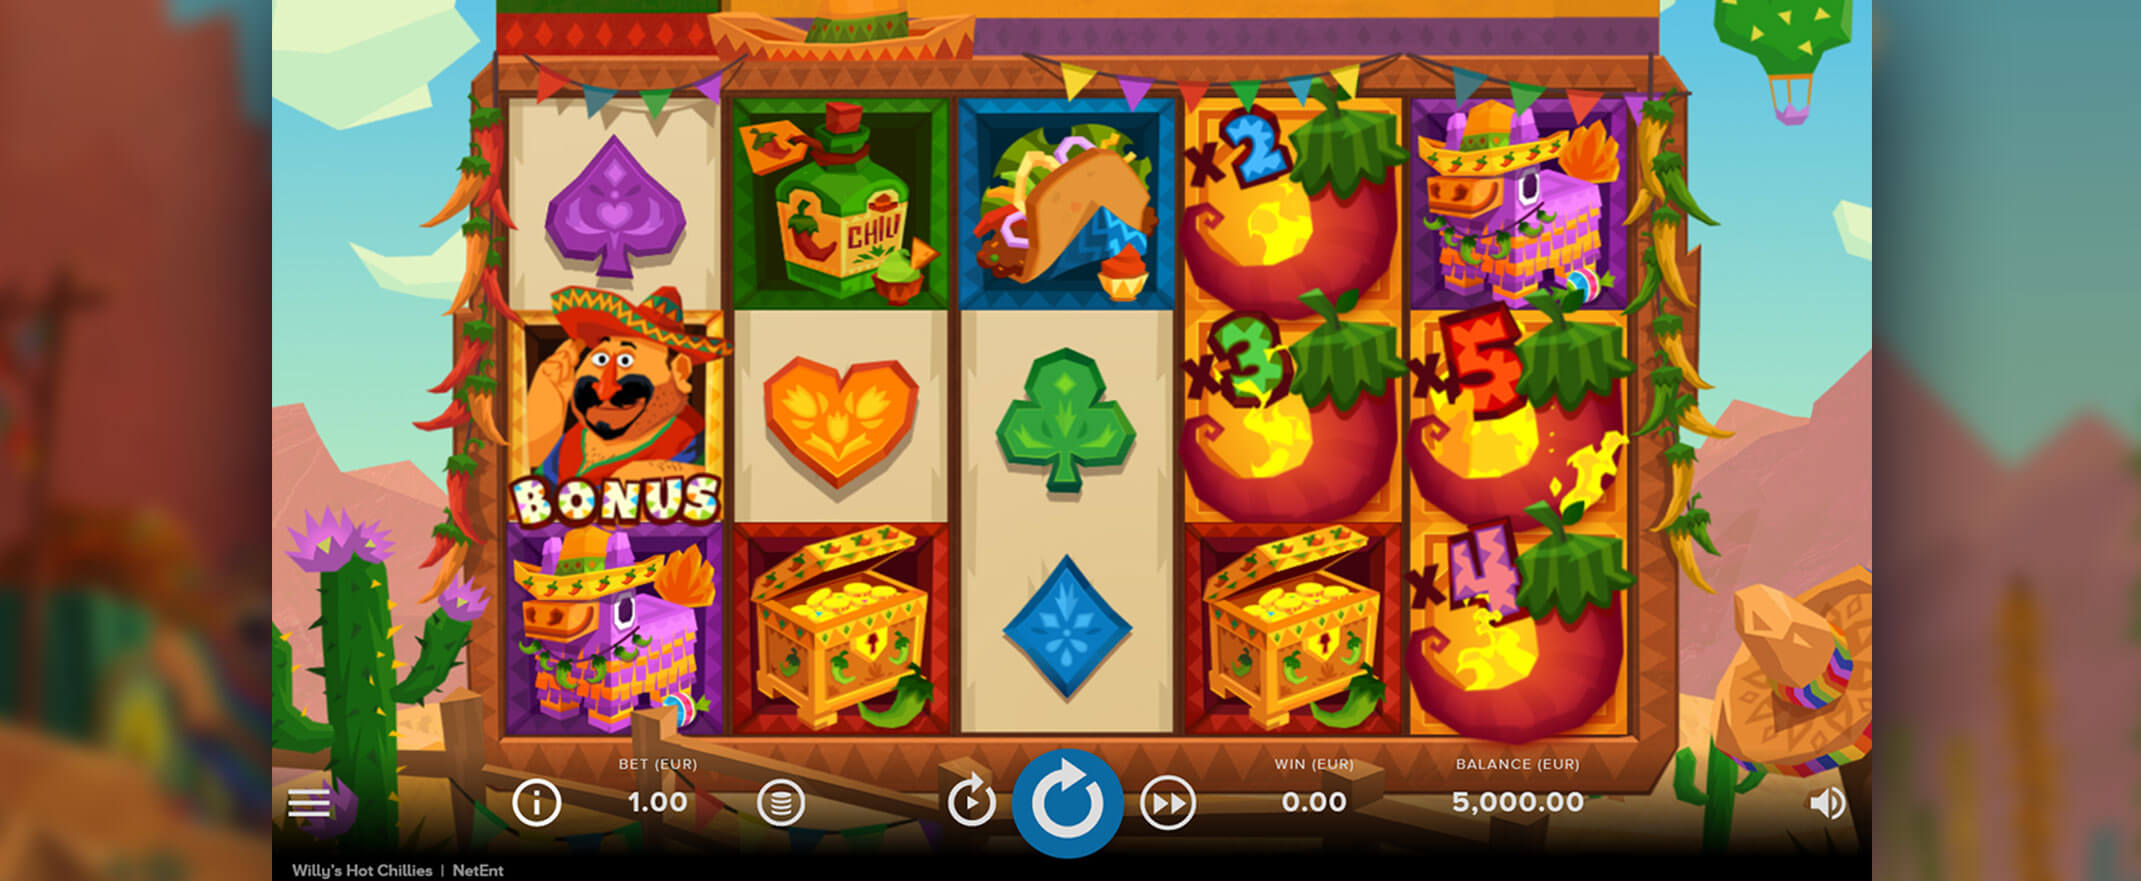 Willy's Hot Chillies Slot Review Screenshot